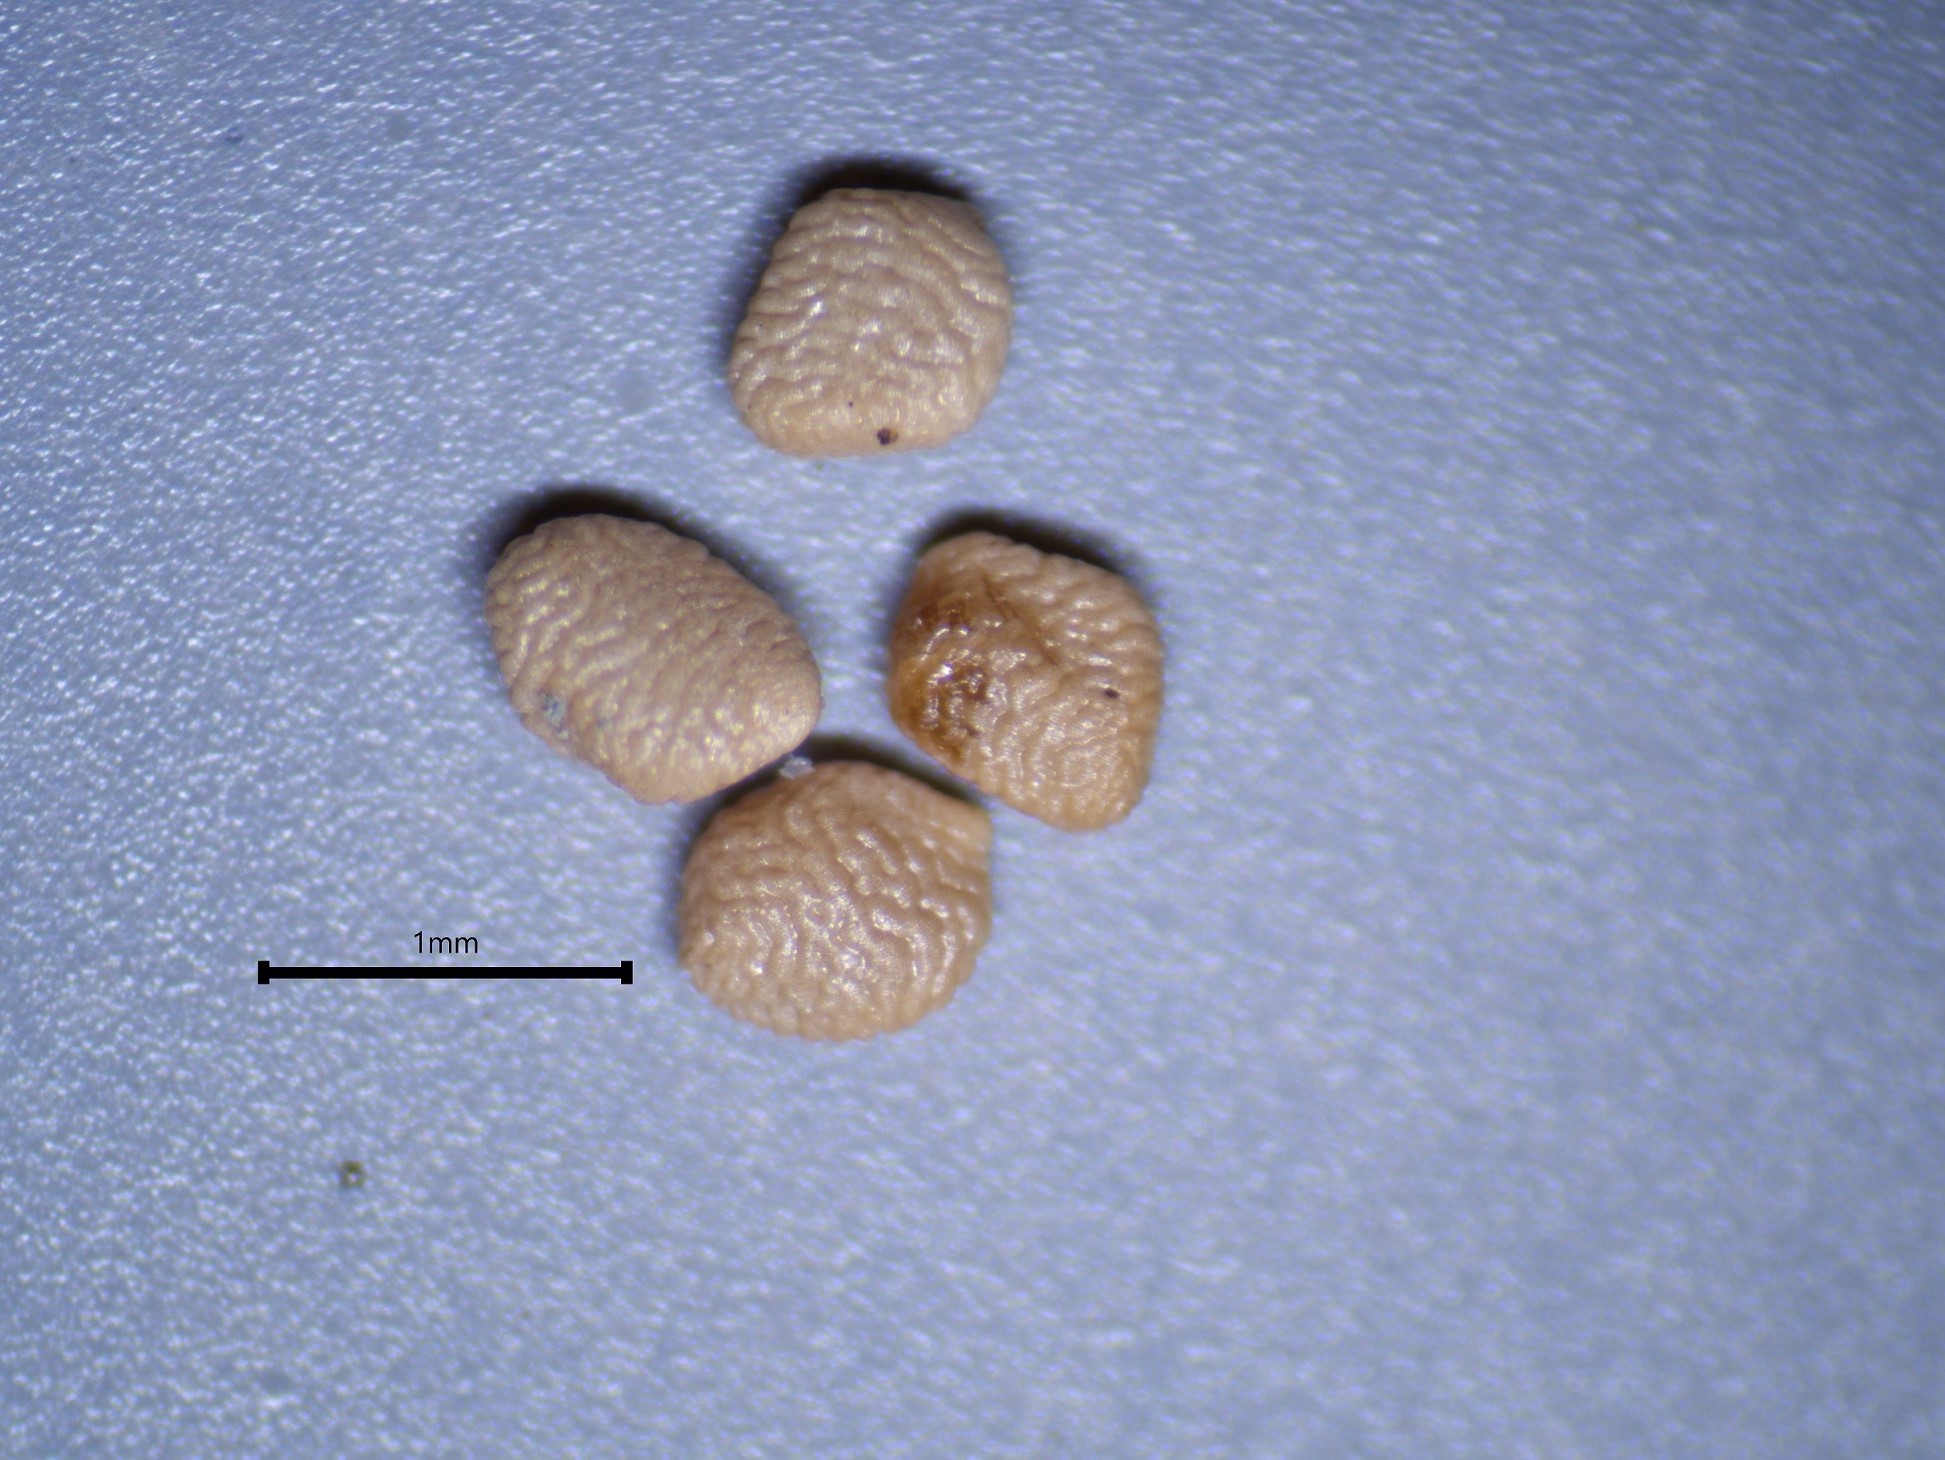 Four small seeds each less than 1mm long. Each seed is a slightly different shape between round and oblong. The surface of the seeds are light brown appearing lightly wrinkled